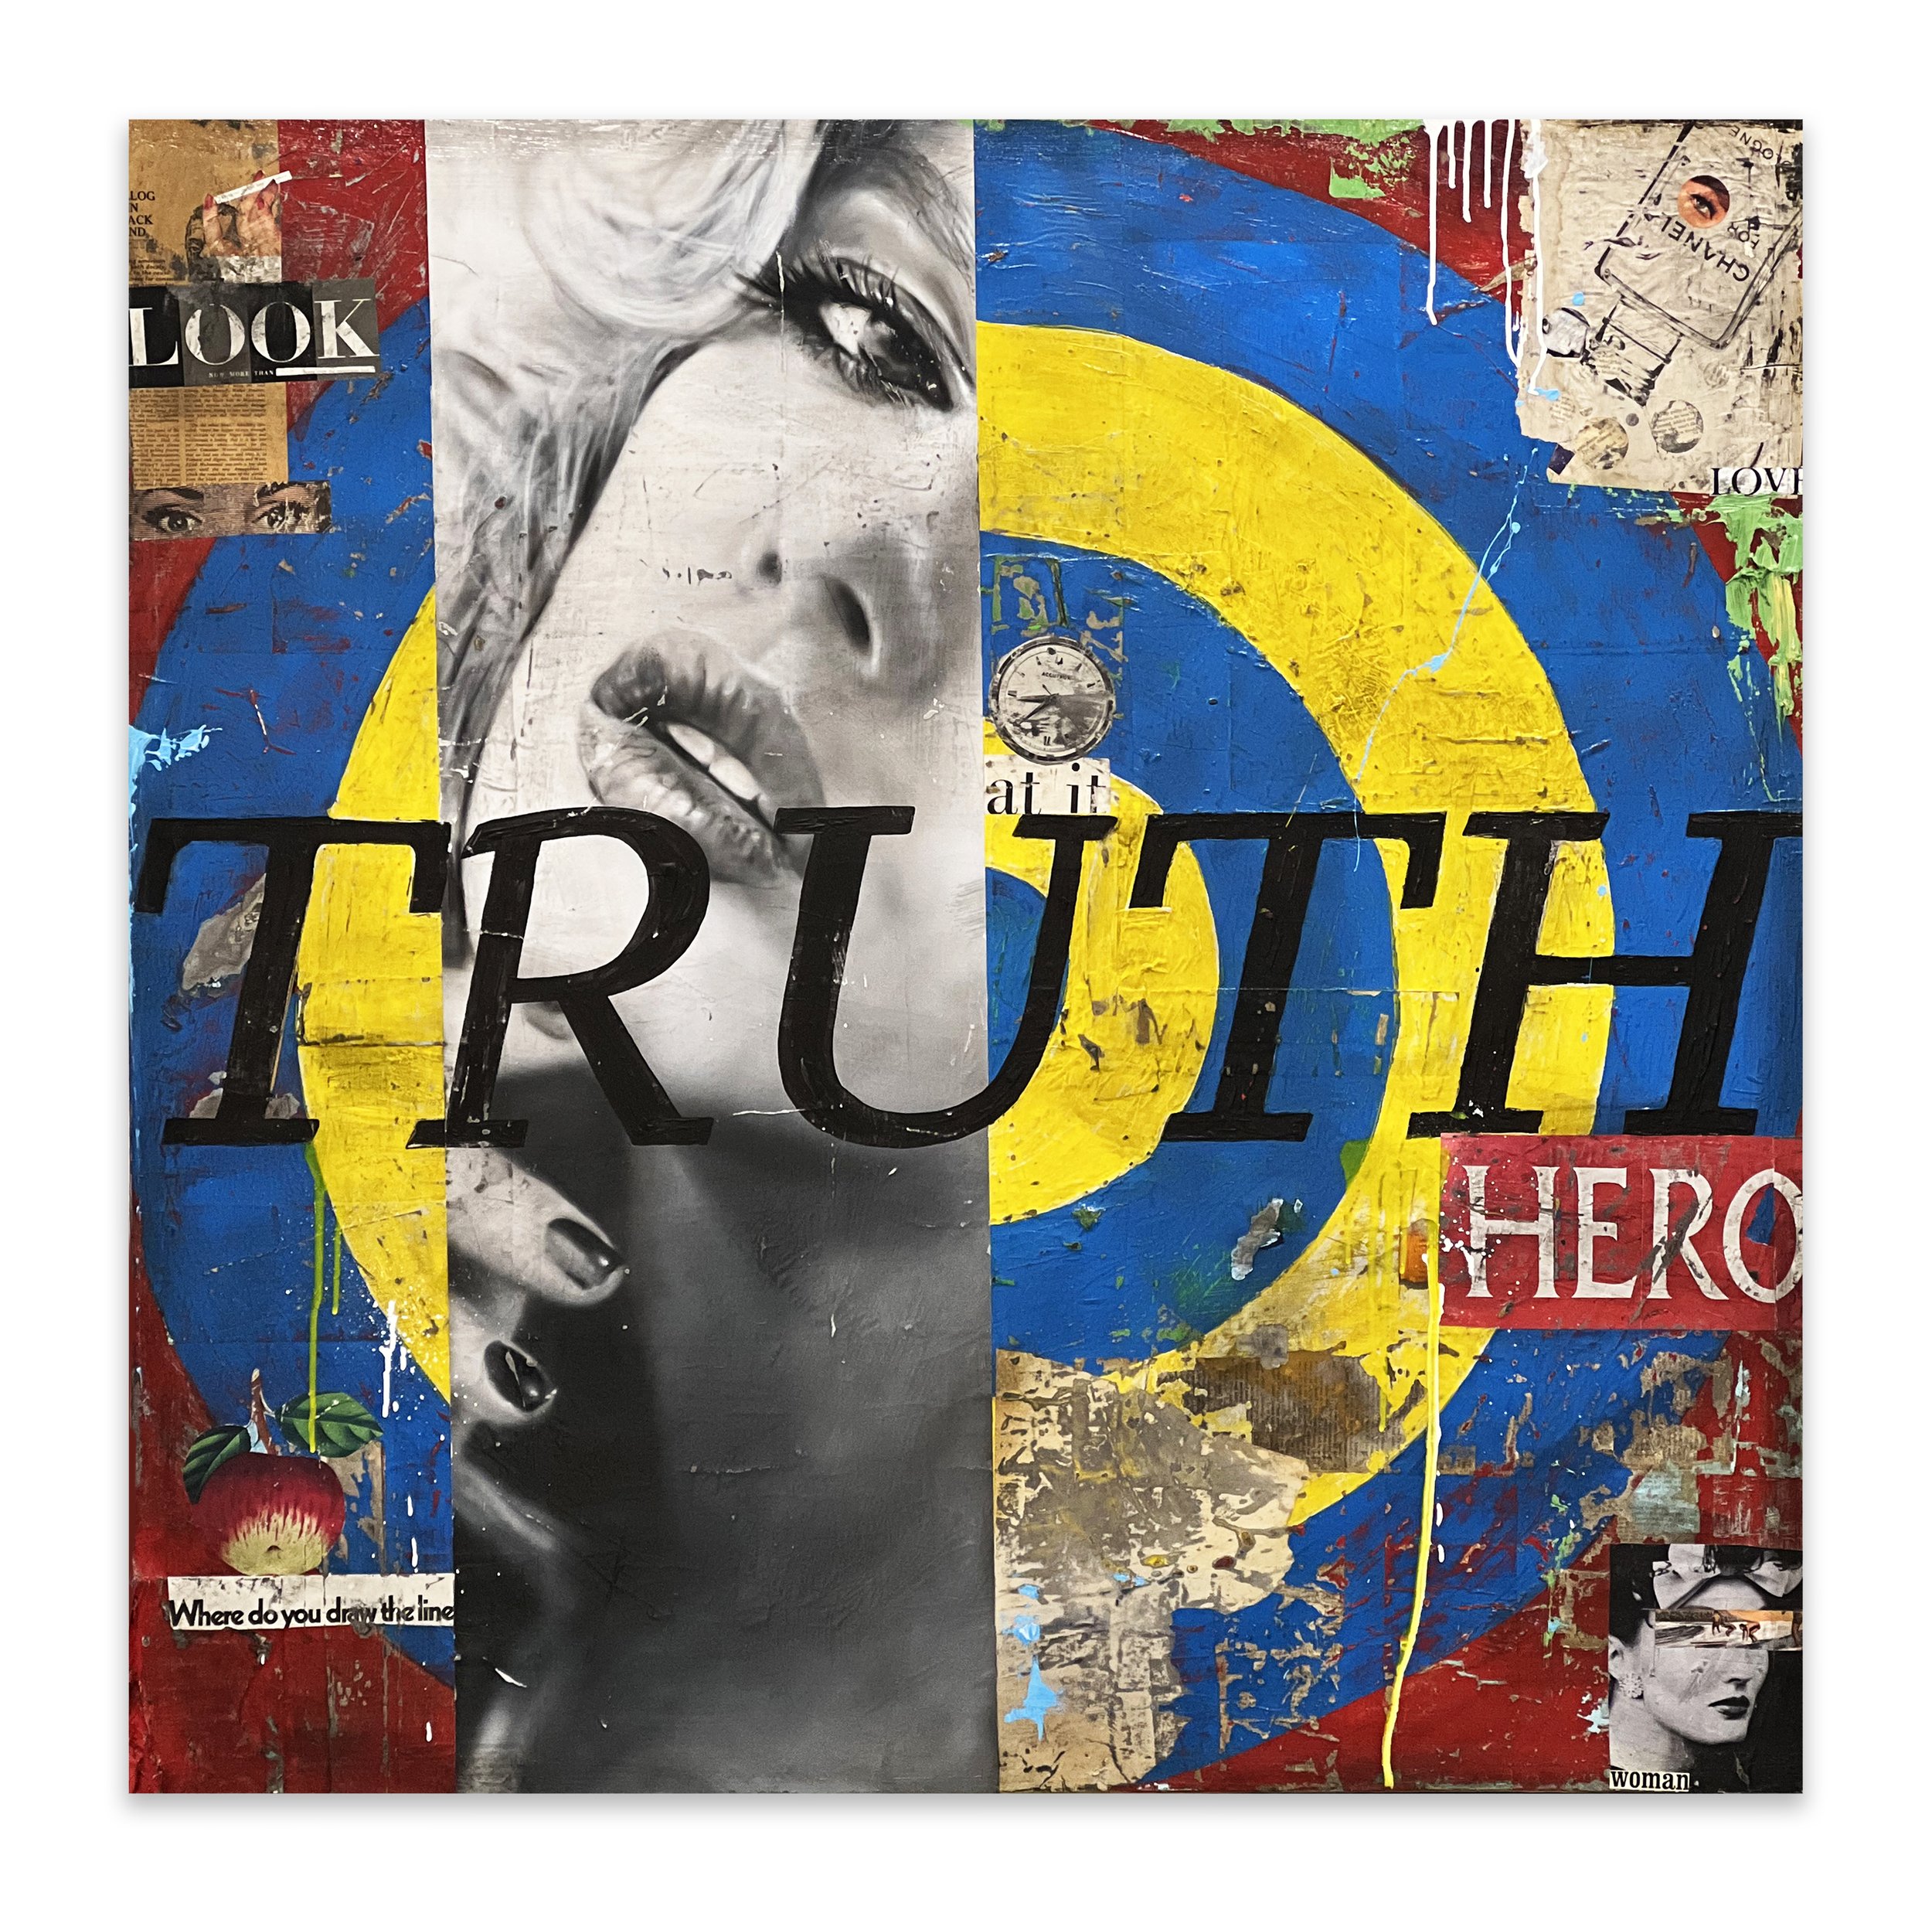 Greg Miller, TRUTH, acrylic and collage on canvas, 48” x 48”